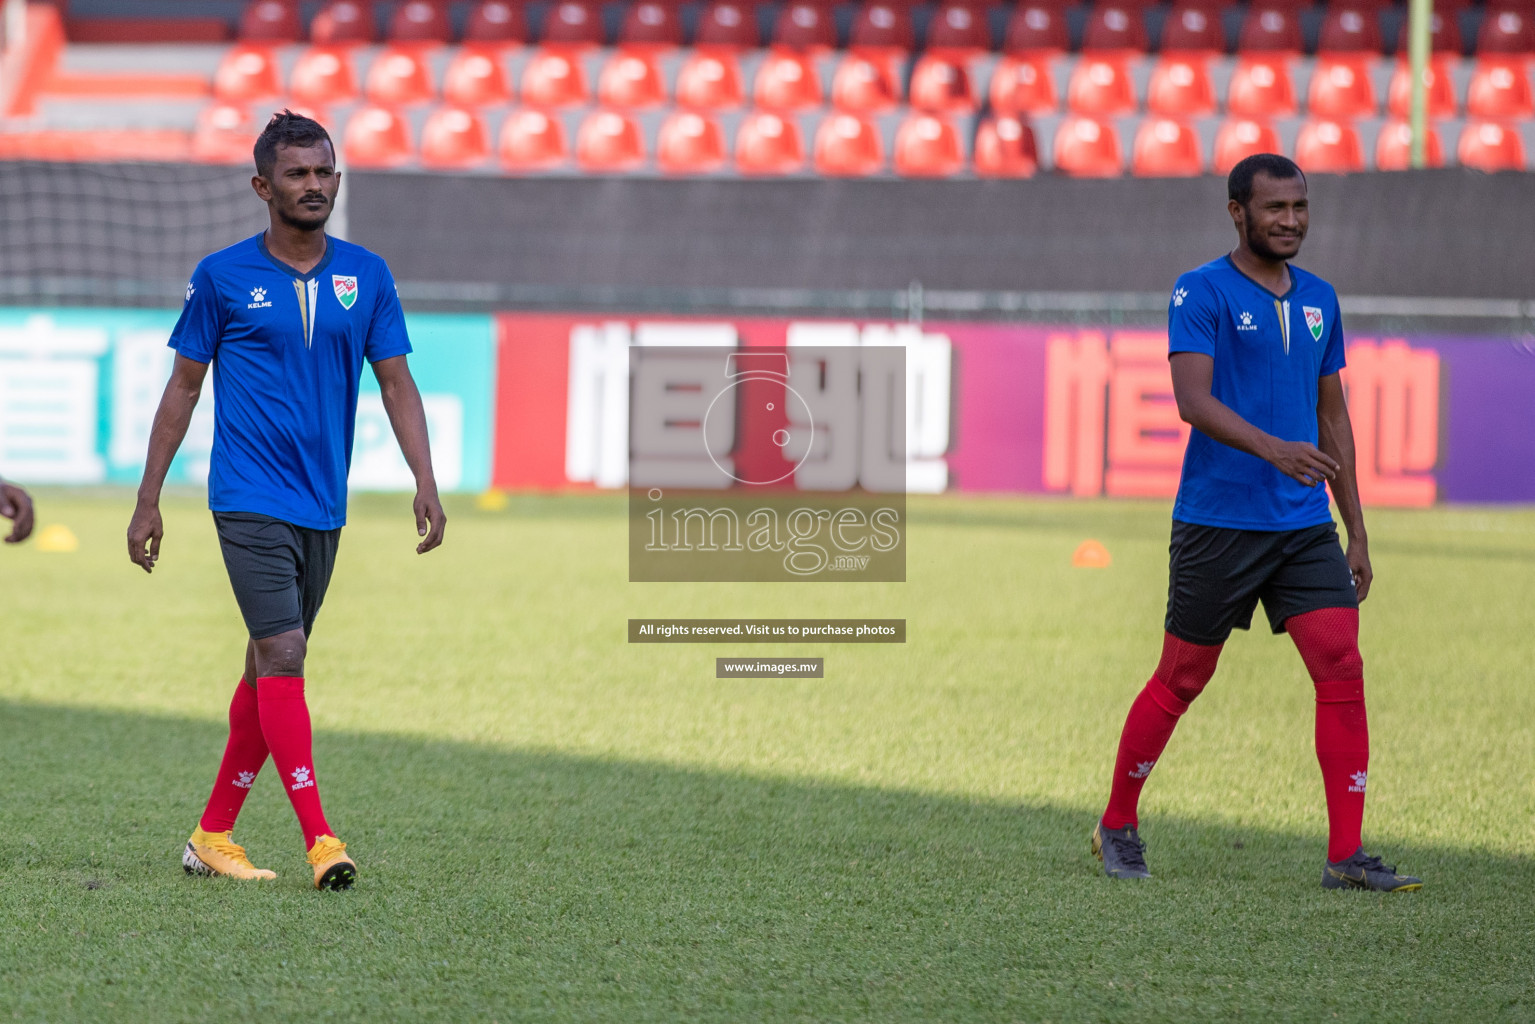 Maldives Practice Session for the FIfa World Cup Qatar 2022 & AFC Asian Cup China 2023 Qualifier match against China on 13th November 2019 in National Football Stadium, Male', Maldives. (Photos: Shuadh Abdul Sattar/images.mv)